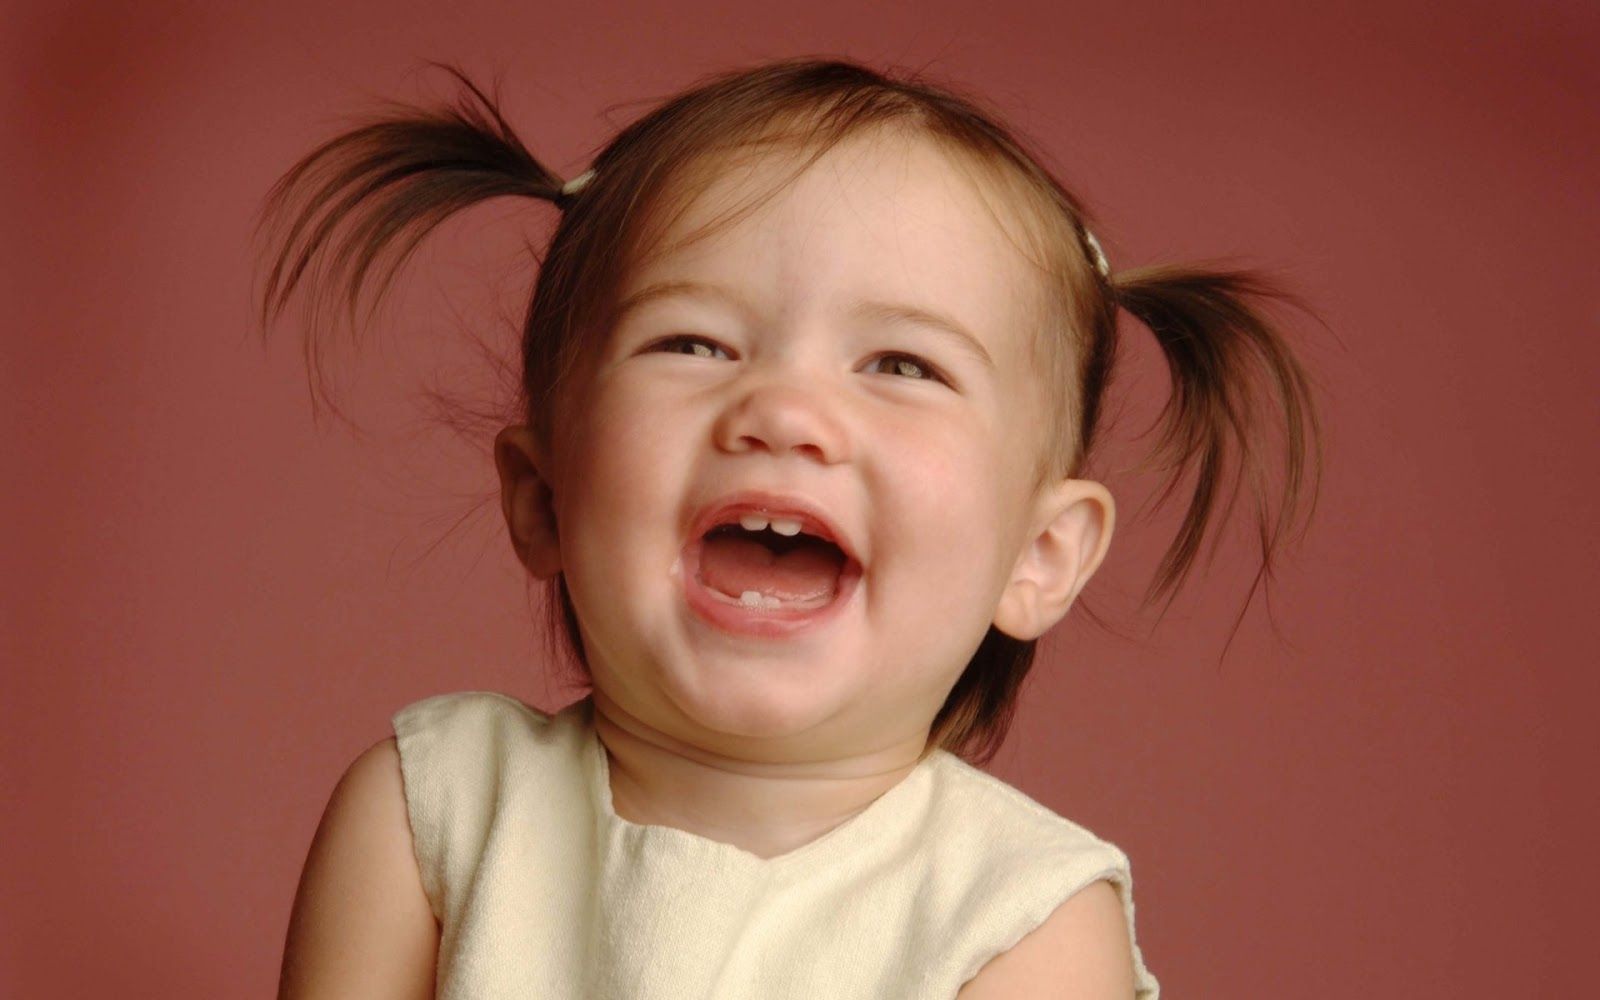 photo, laughing baby image, cute baby .quotesblogs.blogspot.com